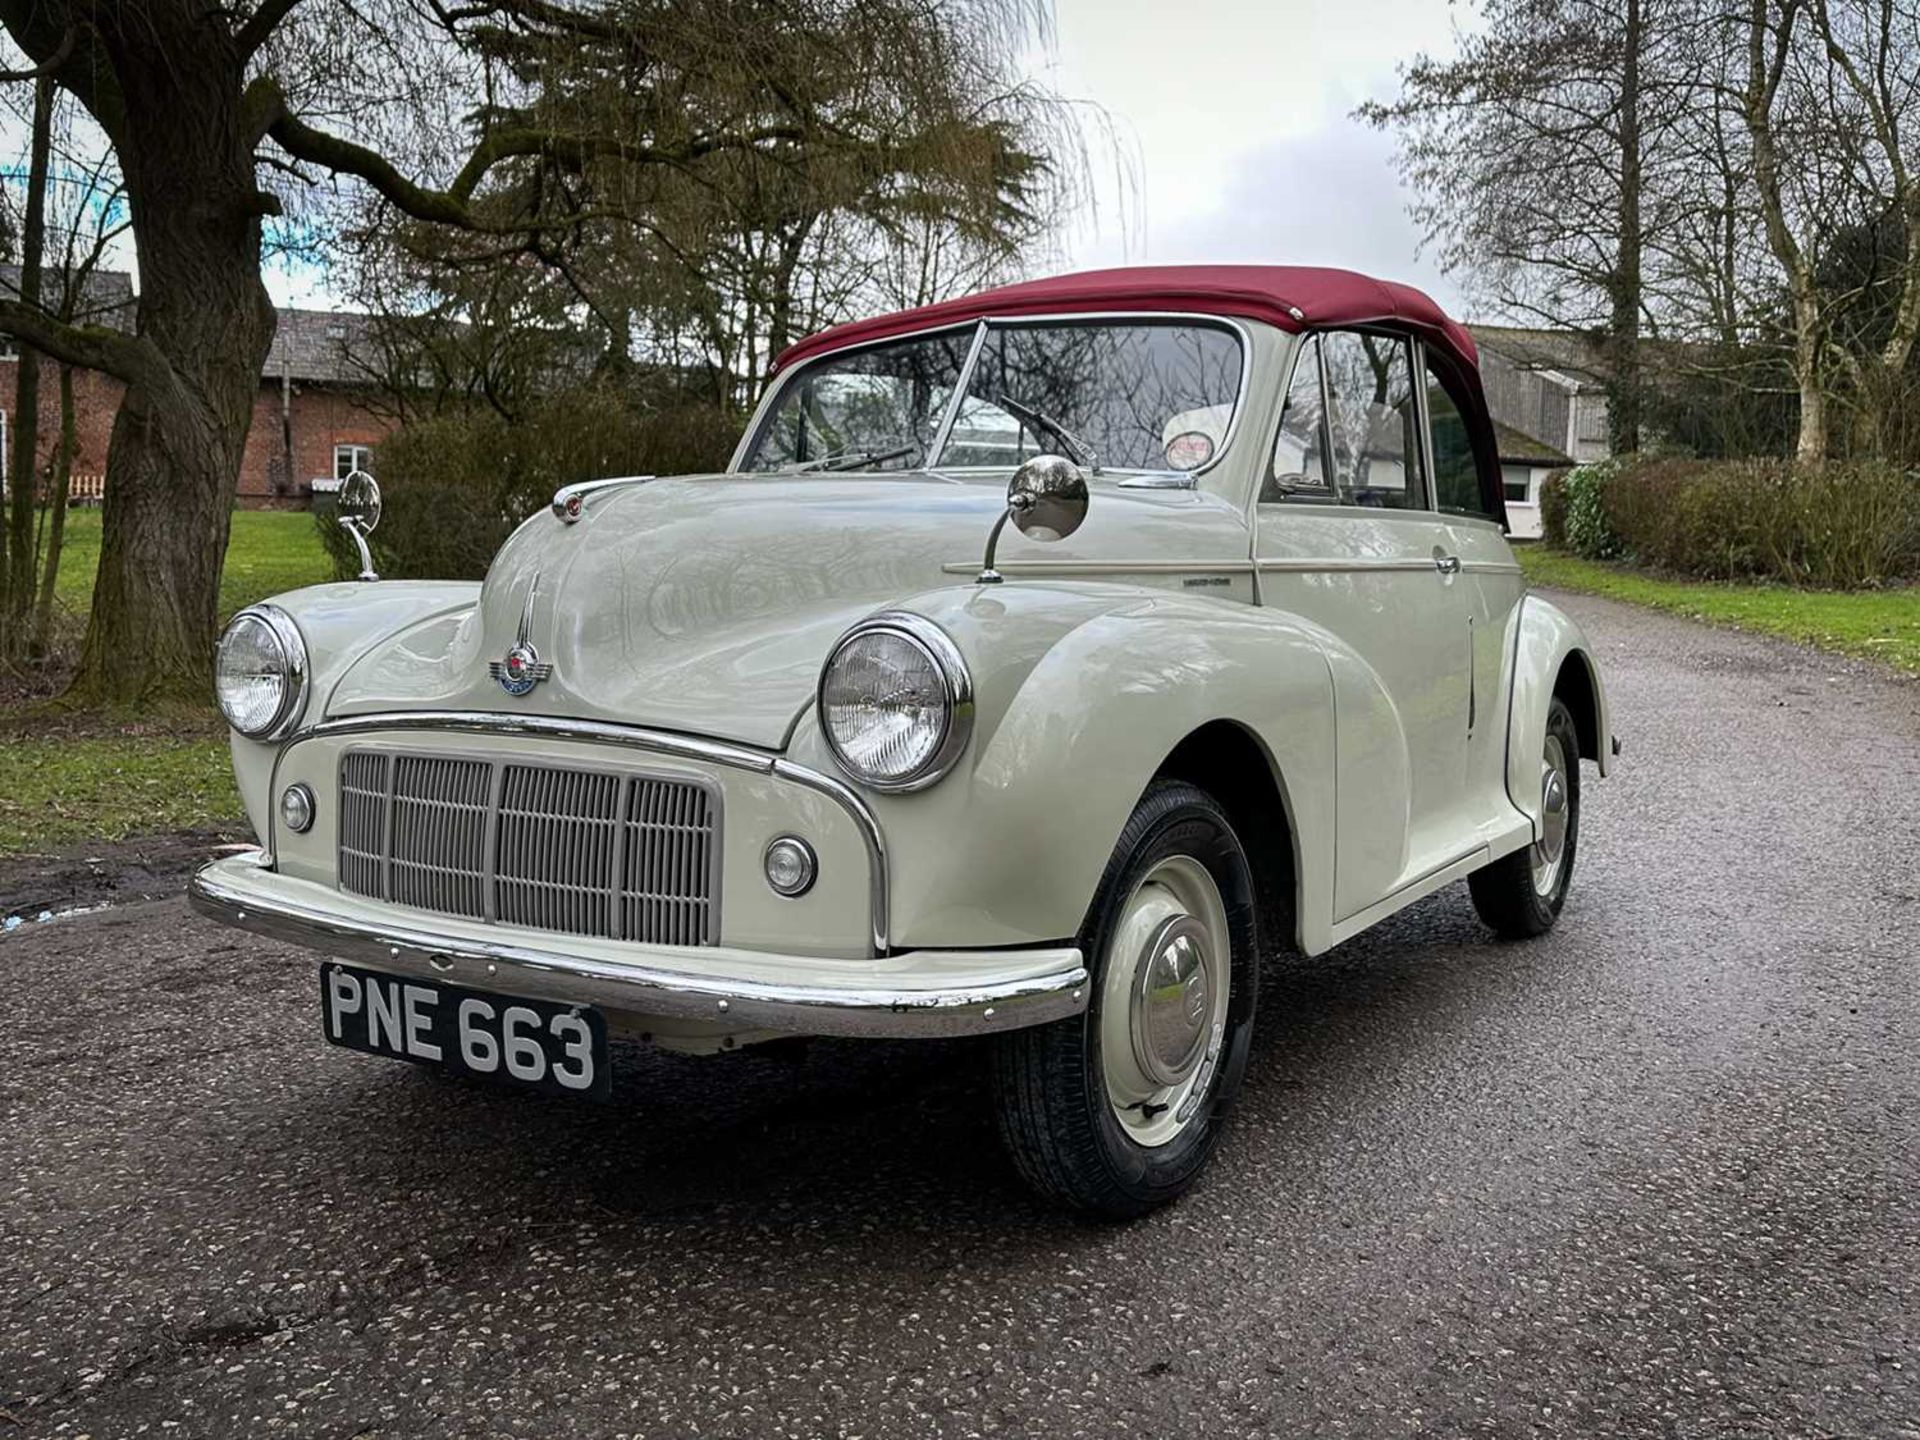 1954 Morris Minor Tourer Fully restored to concours standard - Image 4 of 100